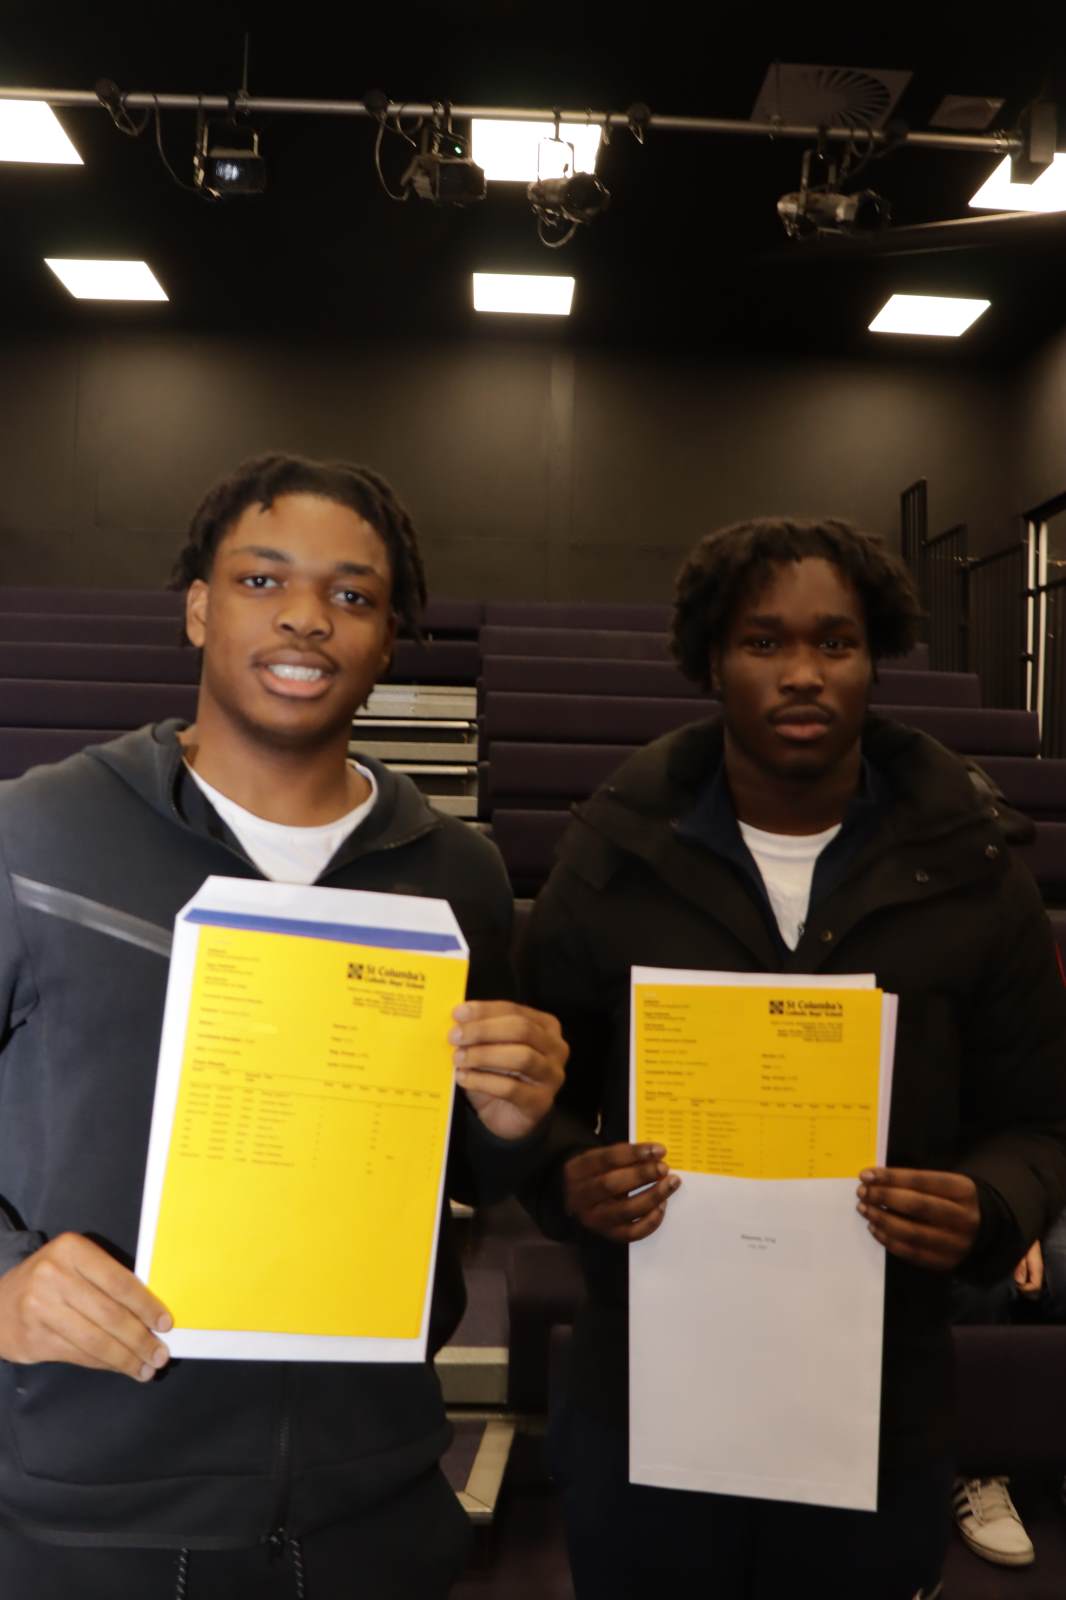 Nnamdi and King with their results